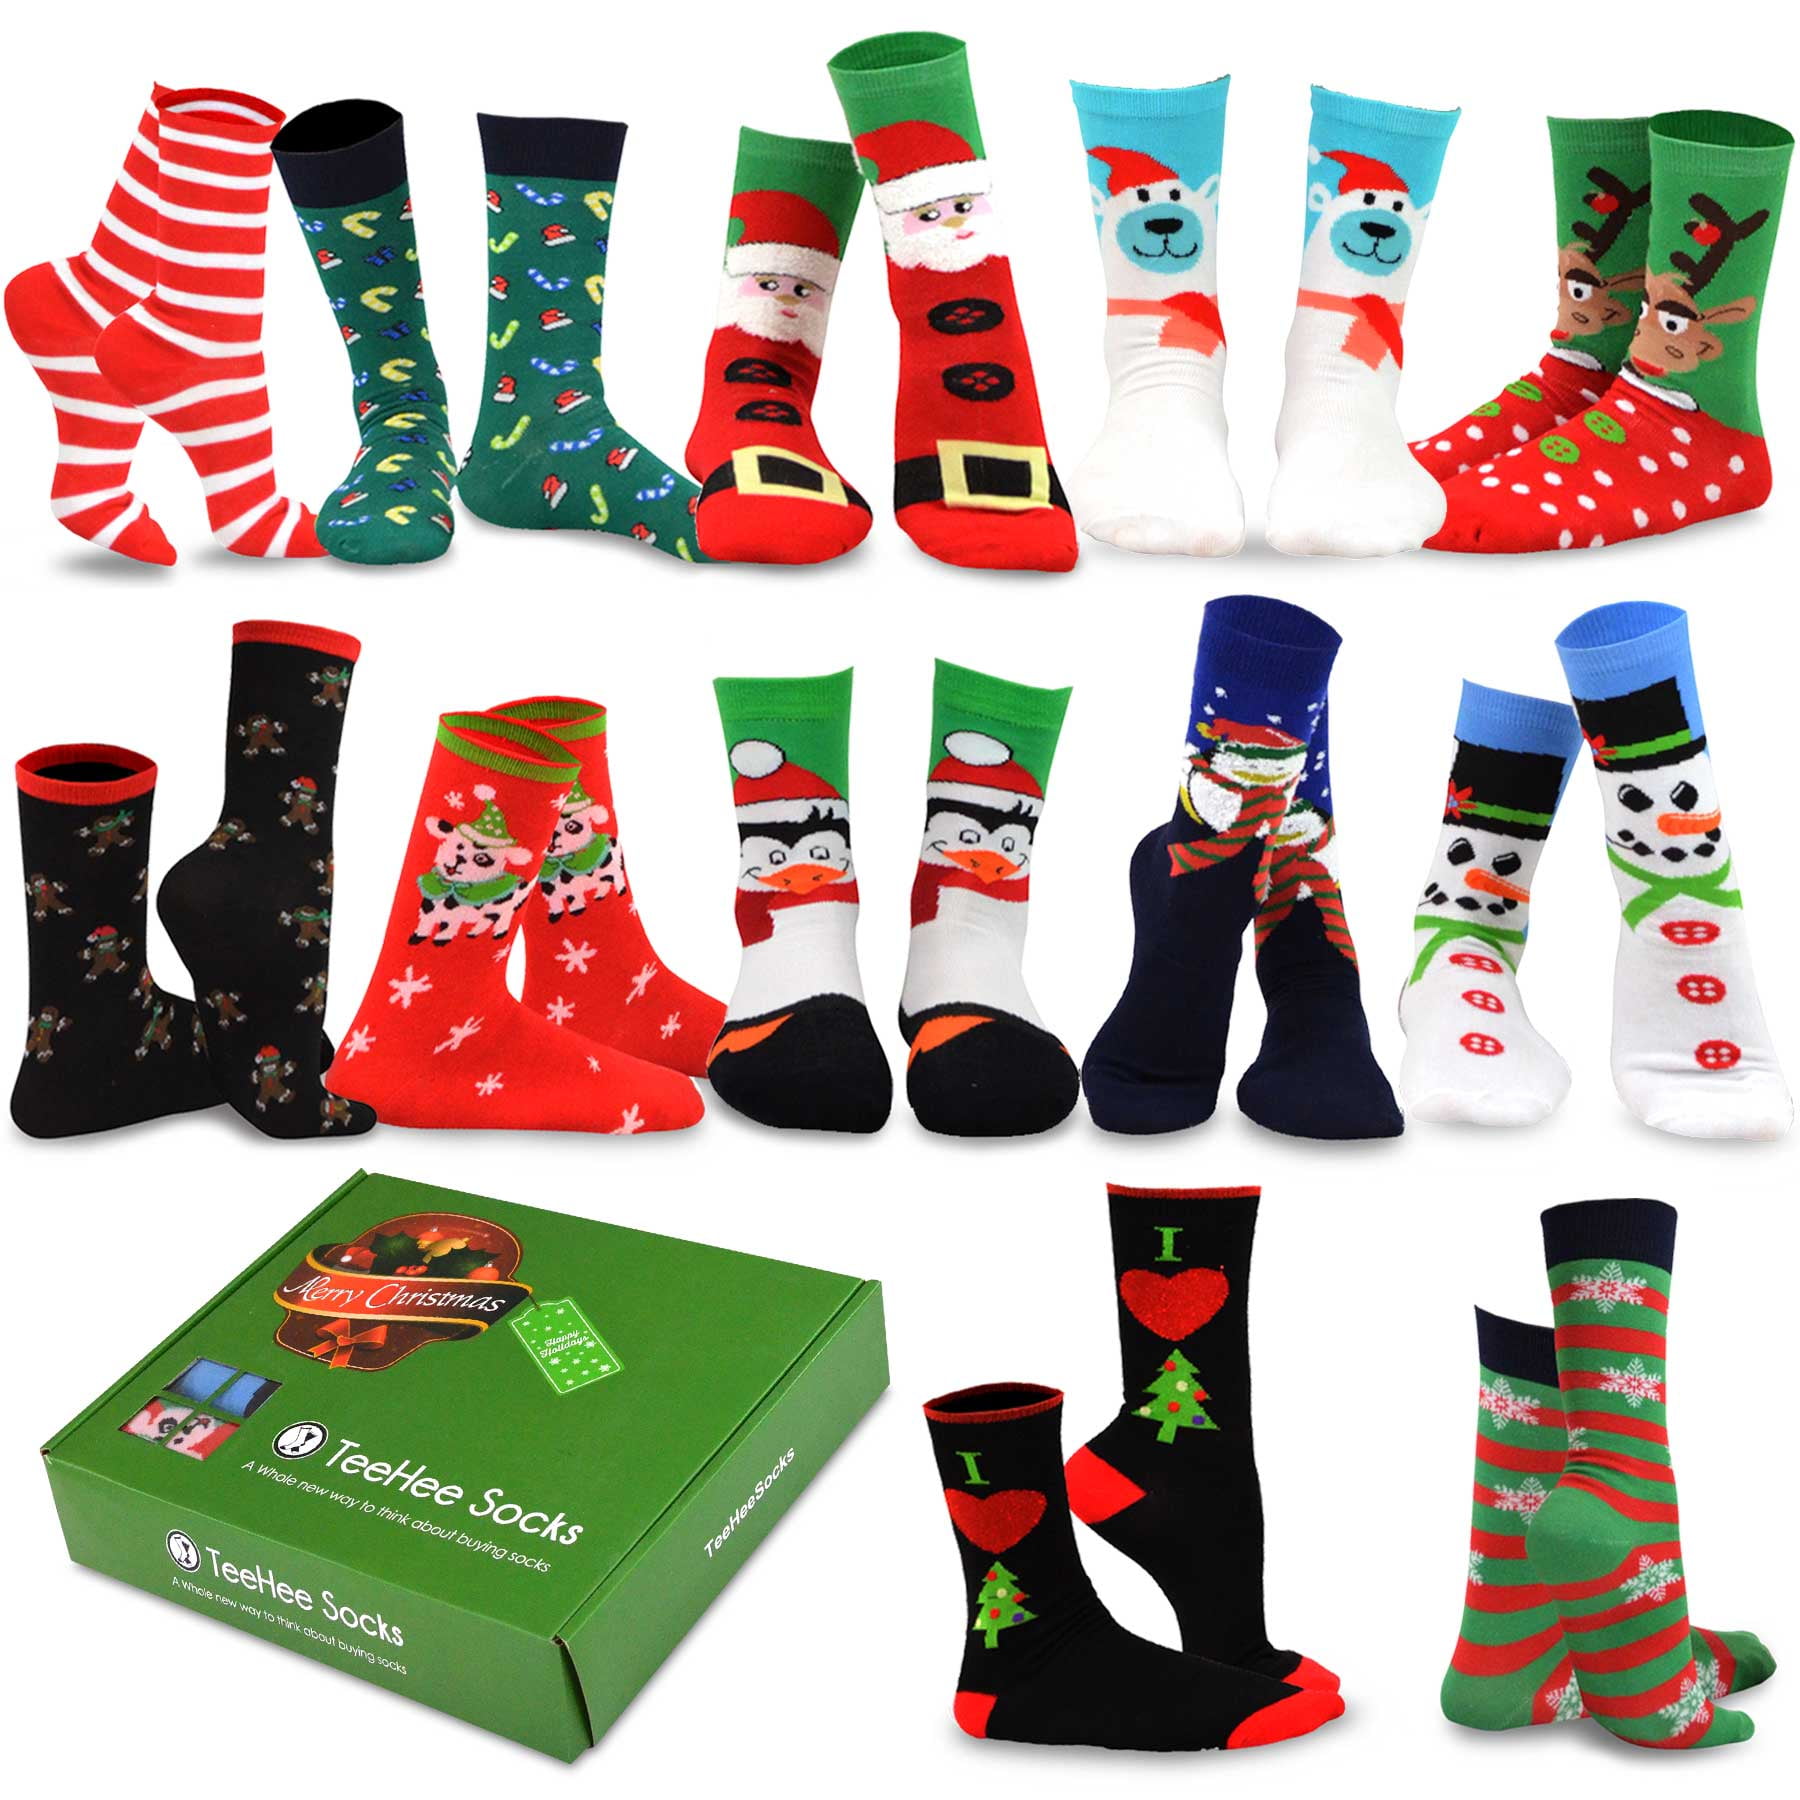  12 Pair, Holiday Christmas Socks, 12 Different